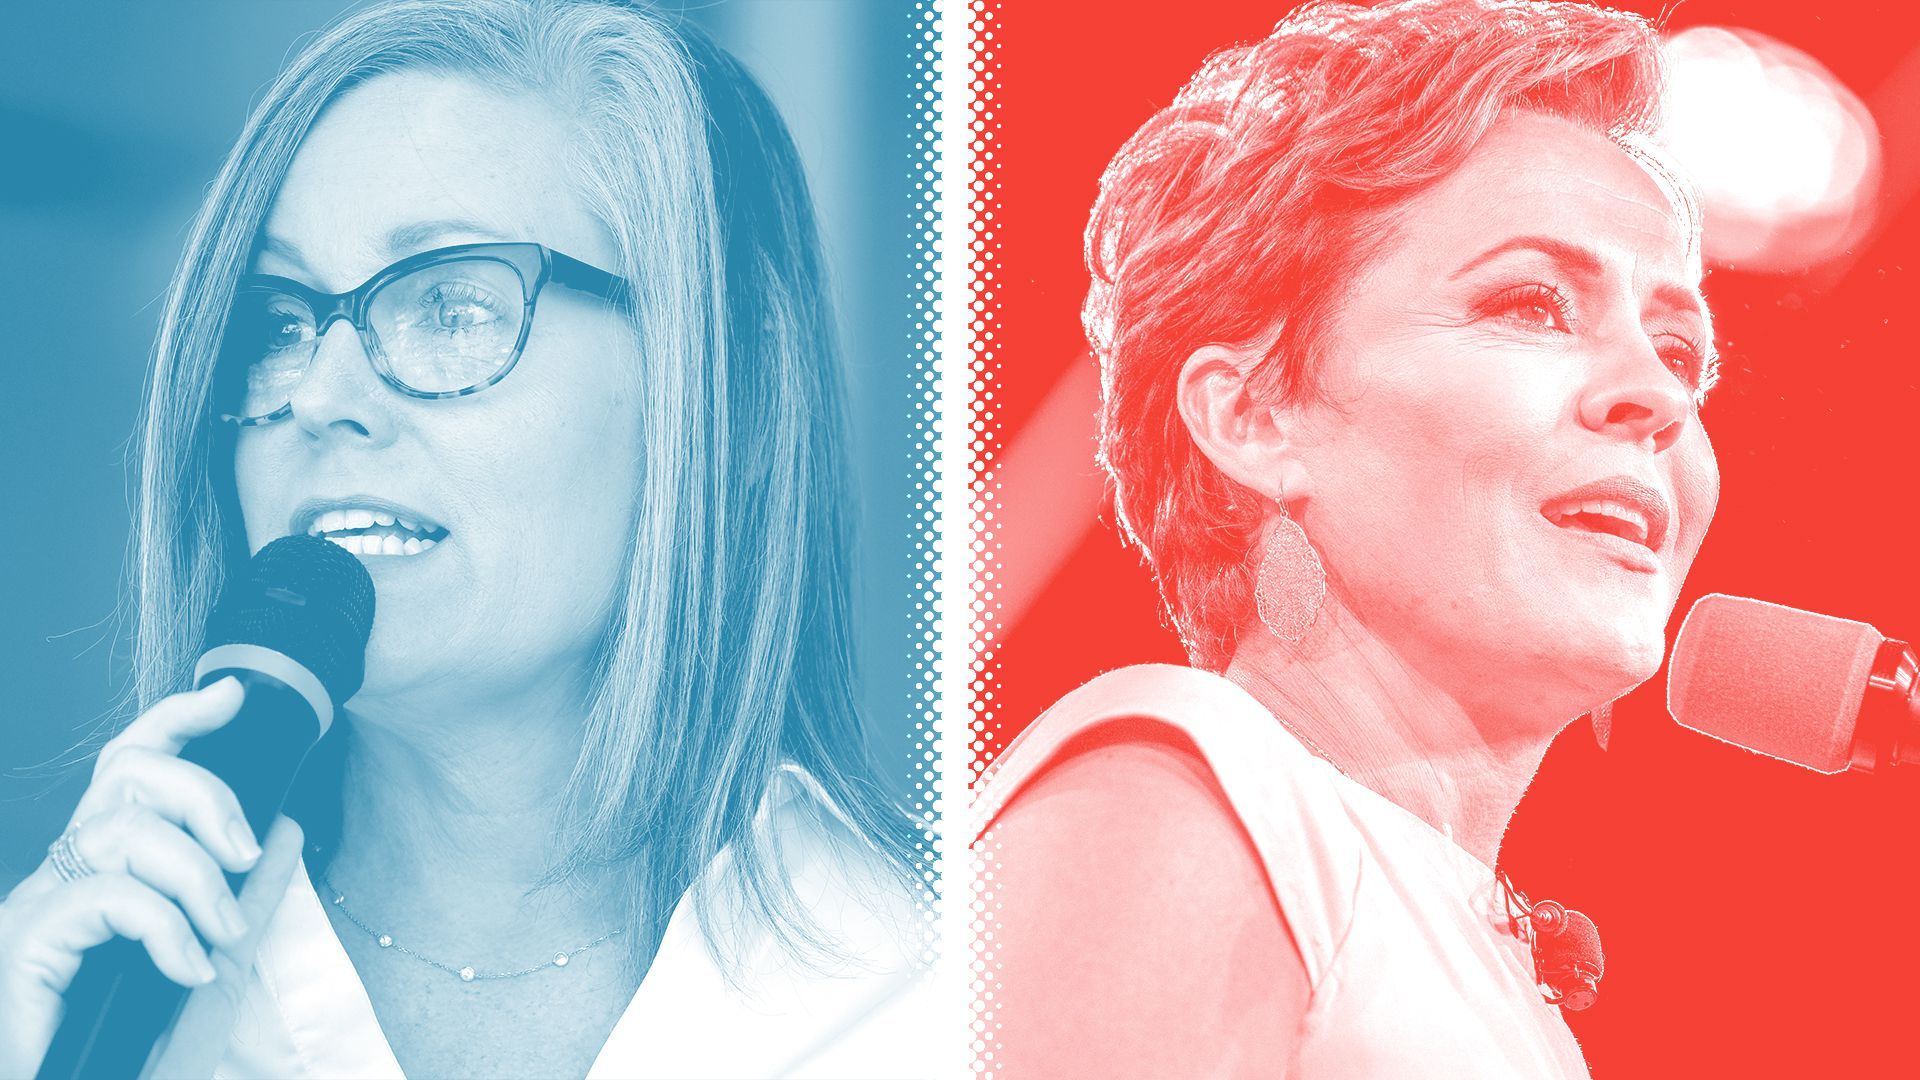 Photo illustration of Katie Hobbs, tinted blue, and Kari Lake, tinted red, separated by a white halftone divider.